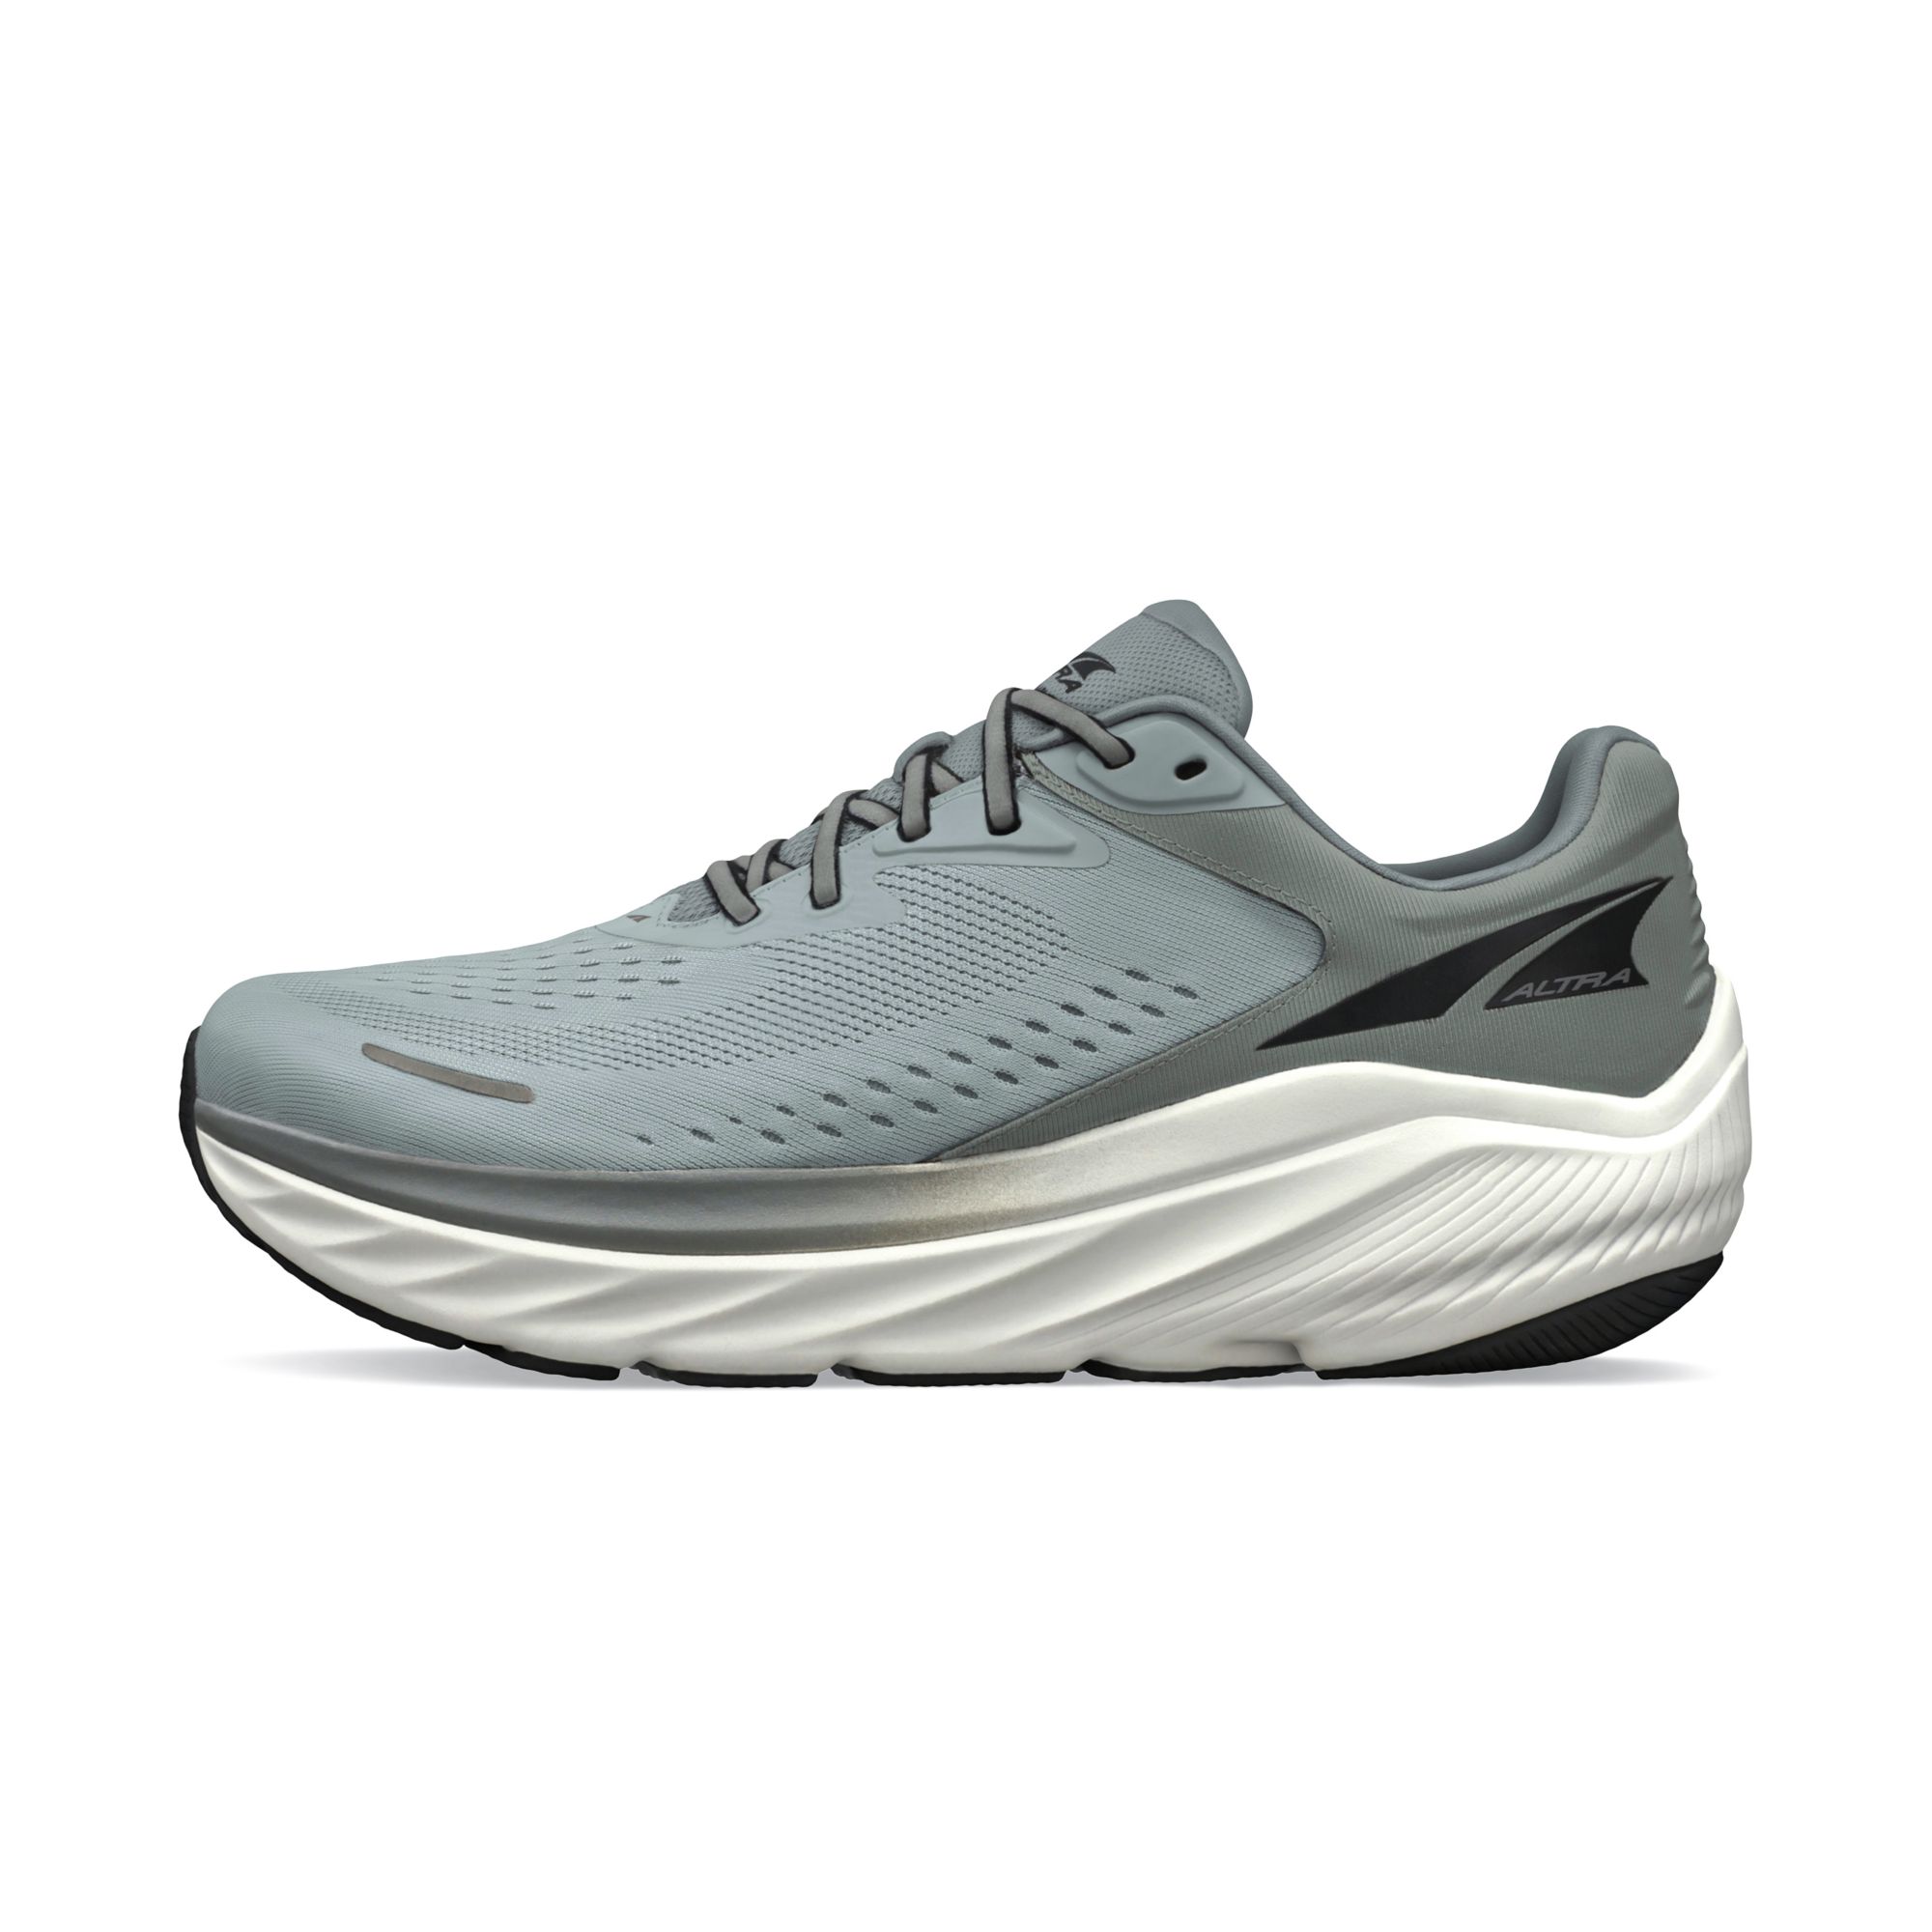 Men's Road Running Shoes - Long Distance & Road Racing Shoes | Altra ...